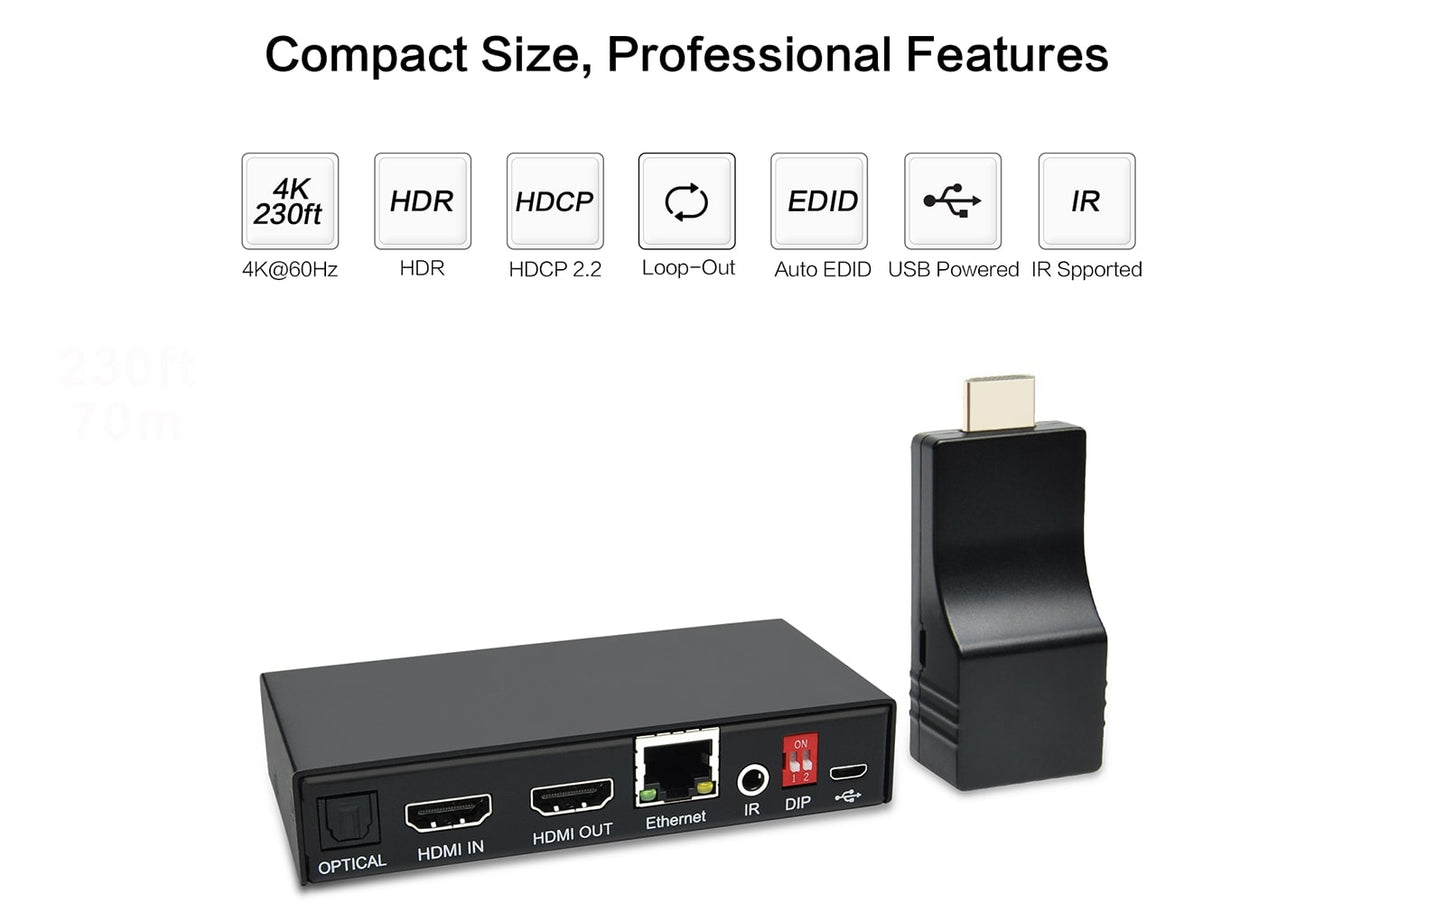 HE-35IR 4K HDMI Transmitter and Receiver - compact size